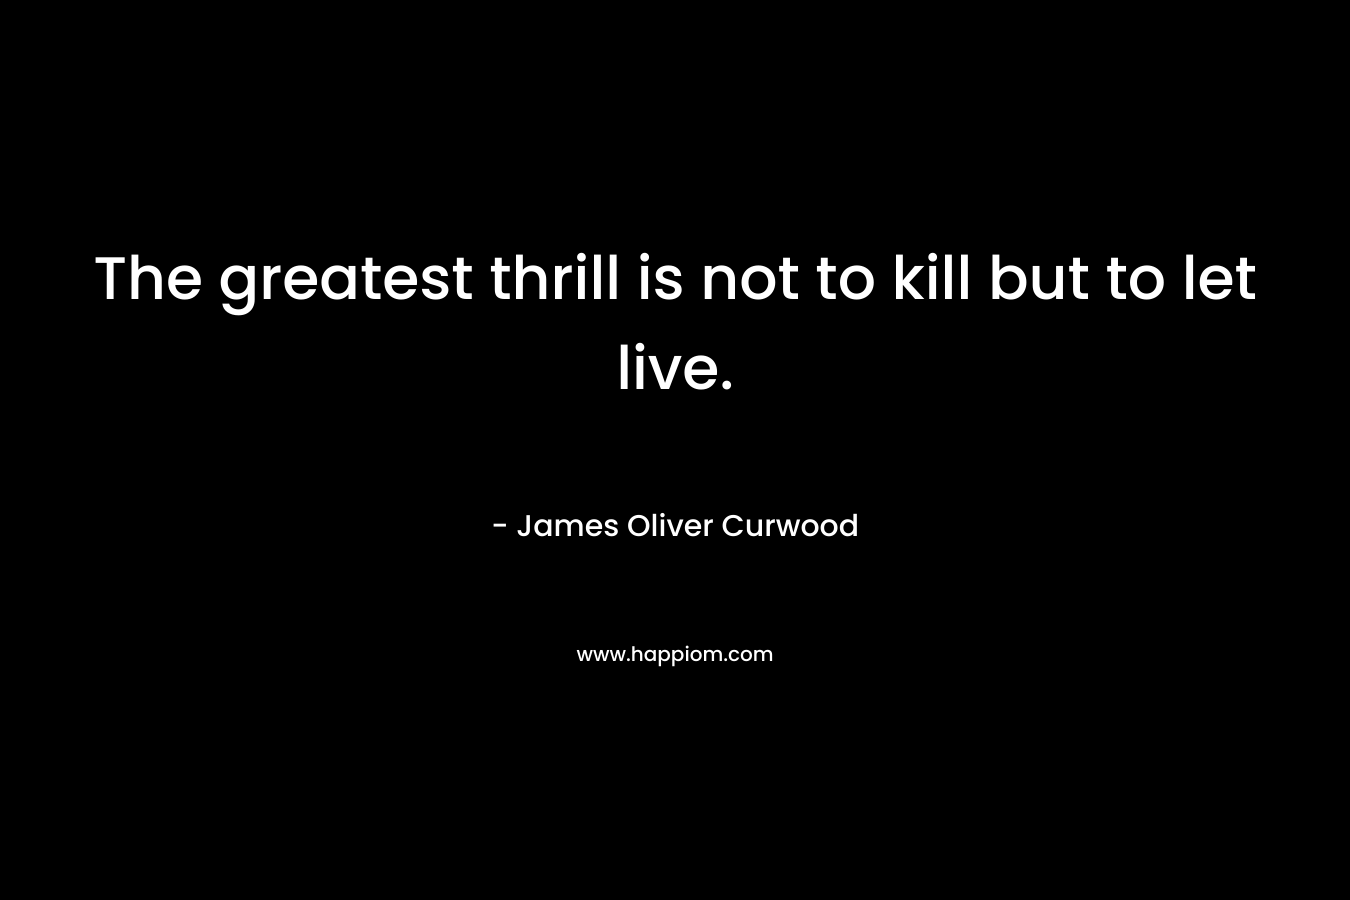 The greatest thrill is not to kill but to let live. – James Oliver Curwood